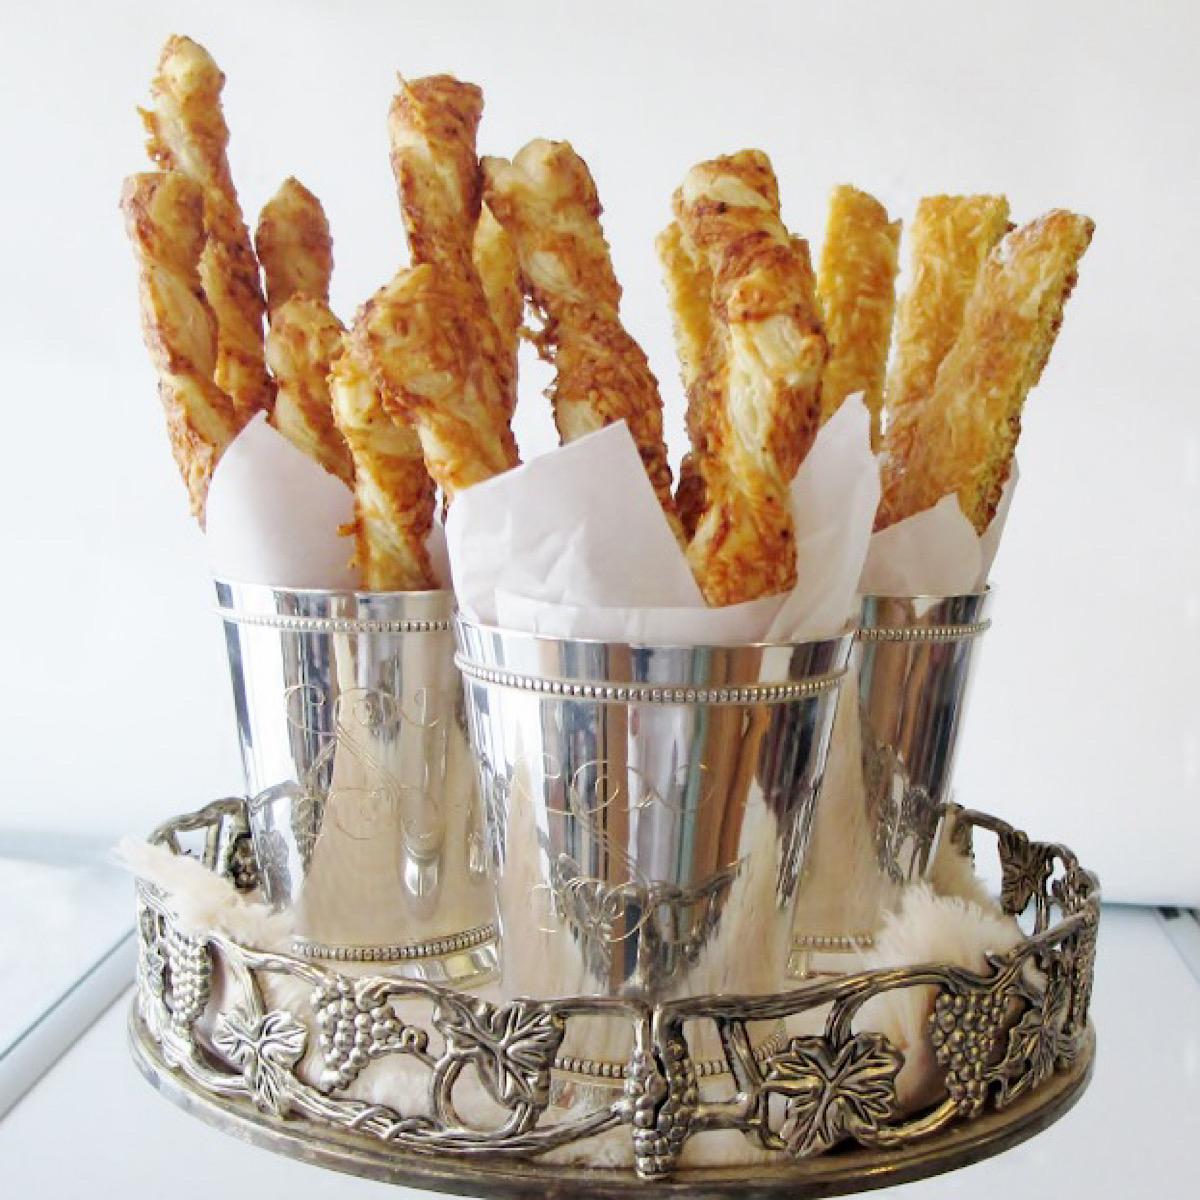 Cheese straws in cups to go with Mint Juleps for Kentucky Derby